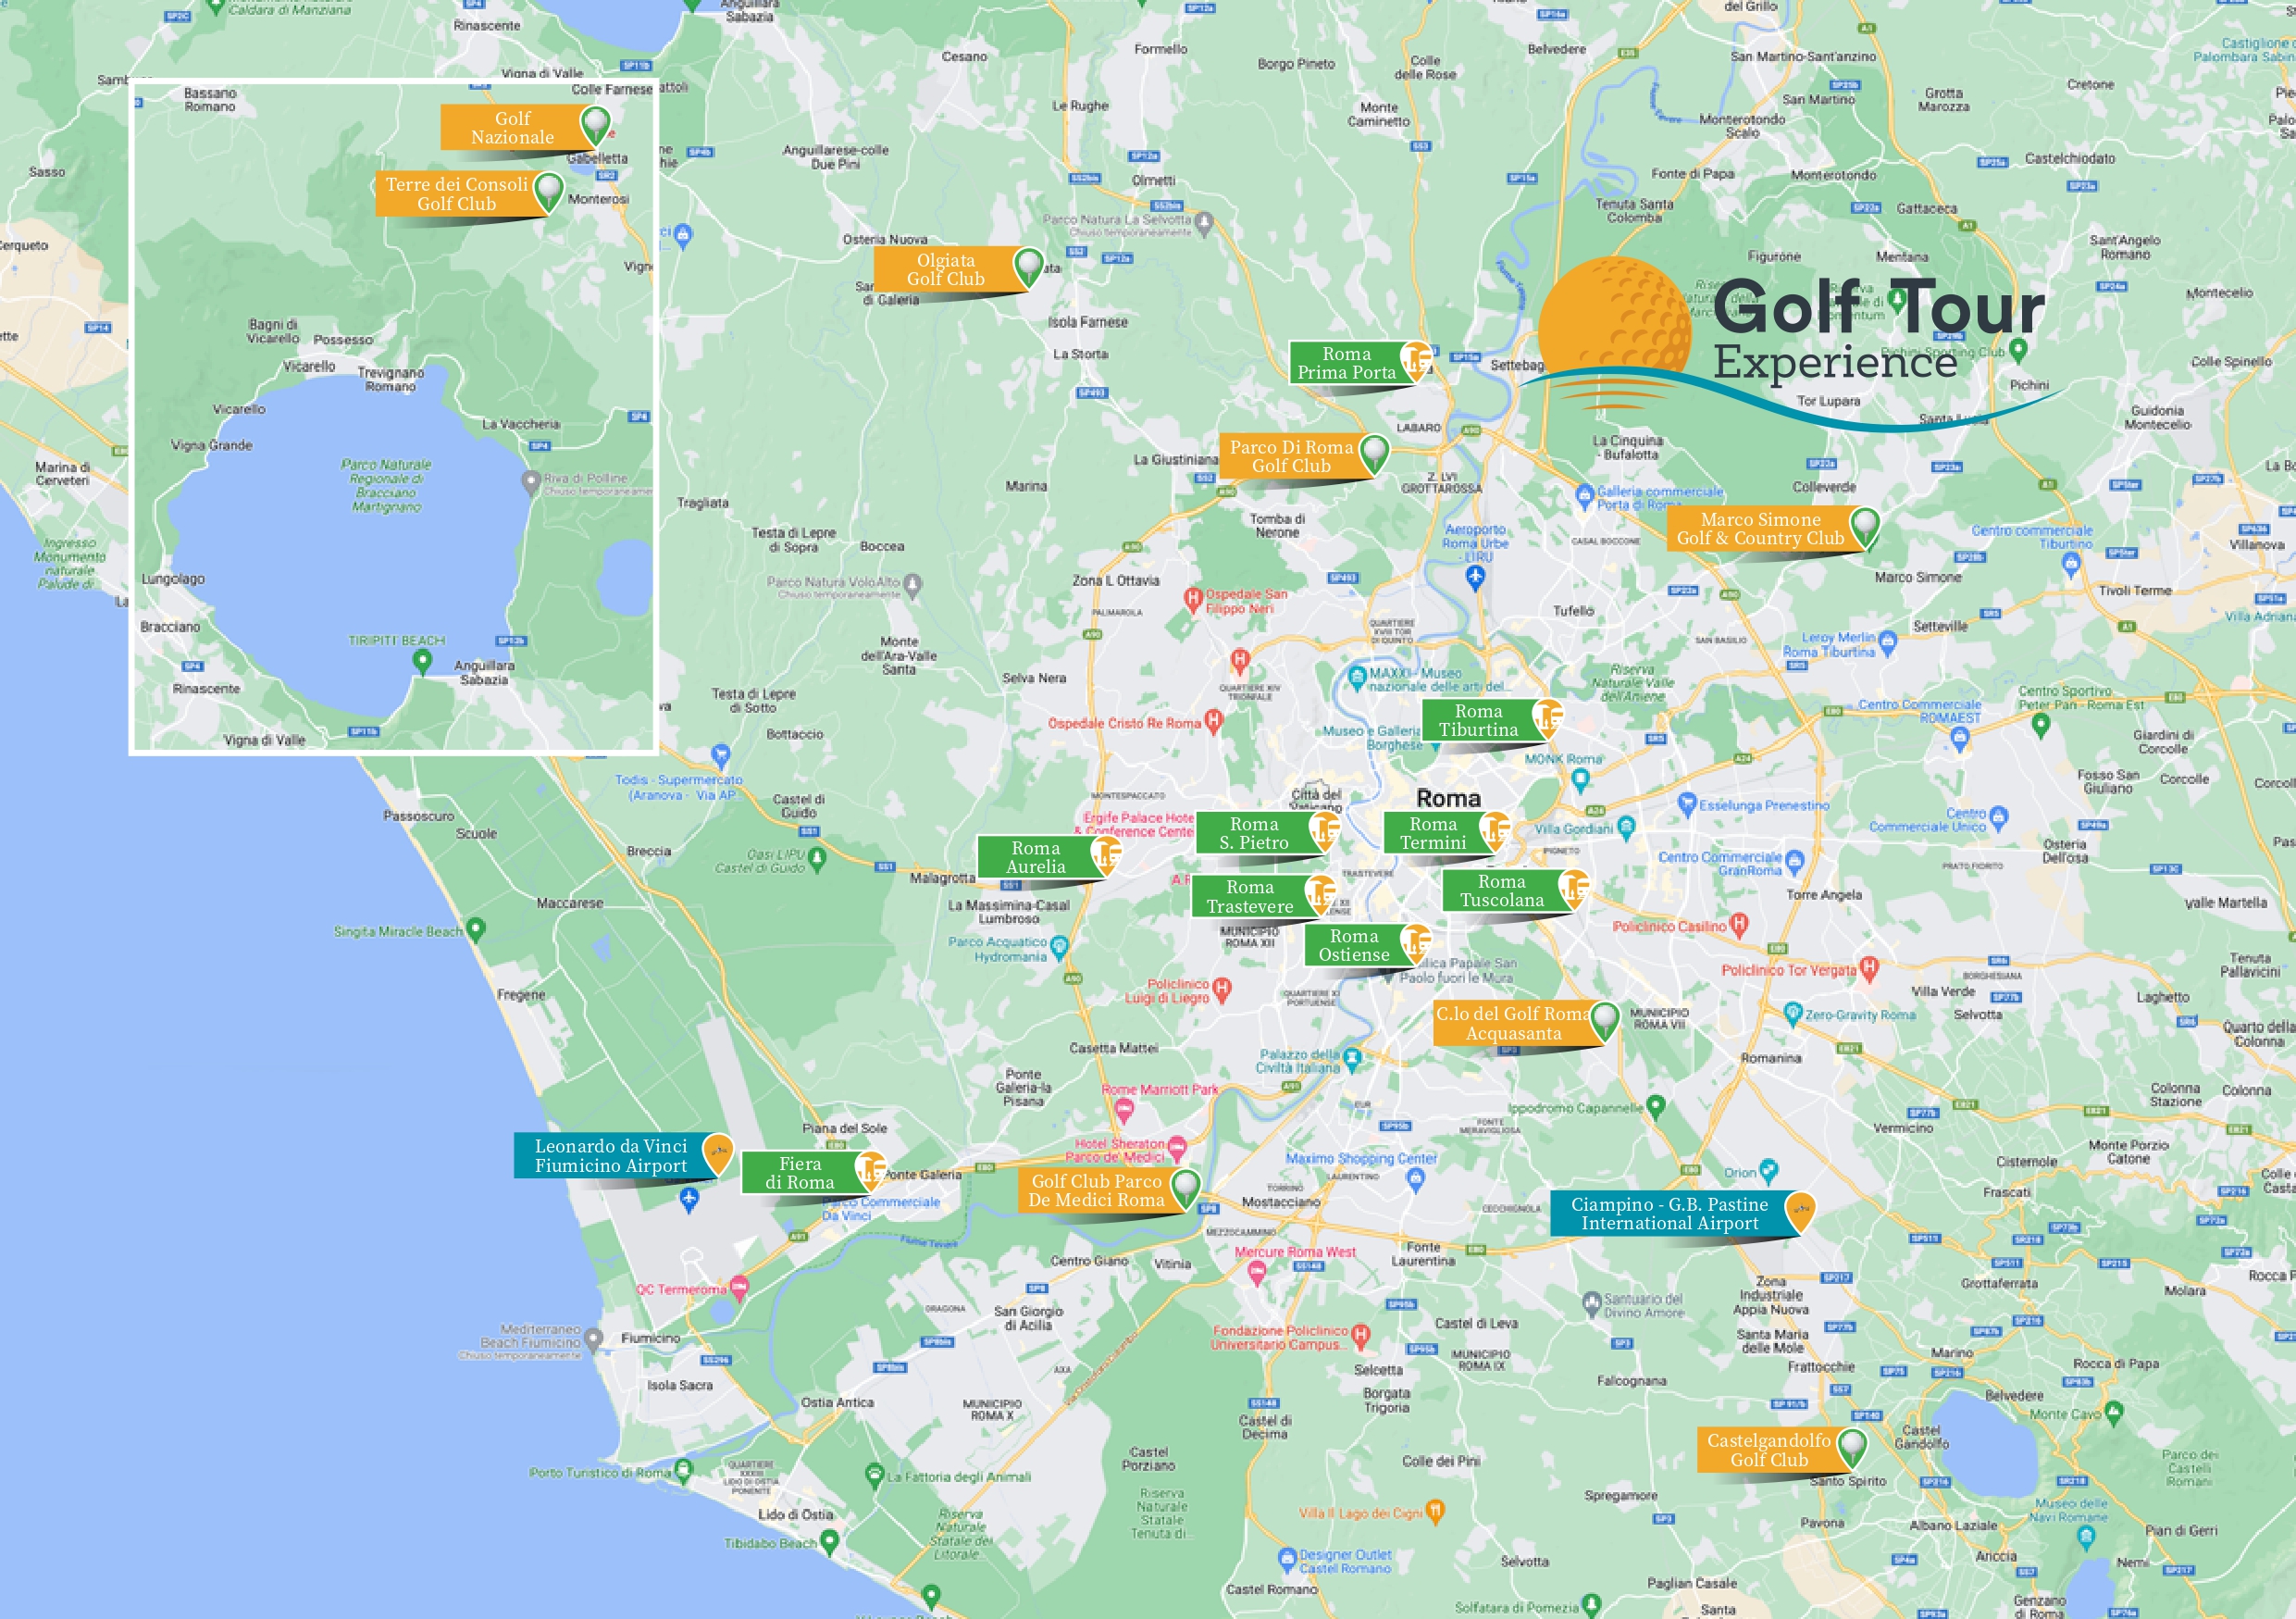 Golf Courses in Rome shown on a map